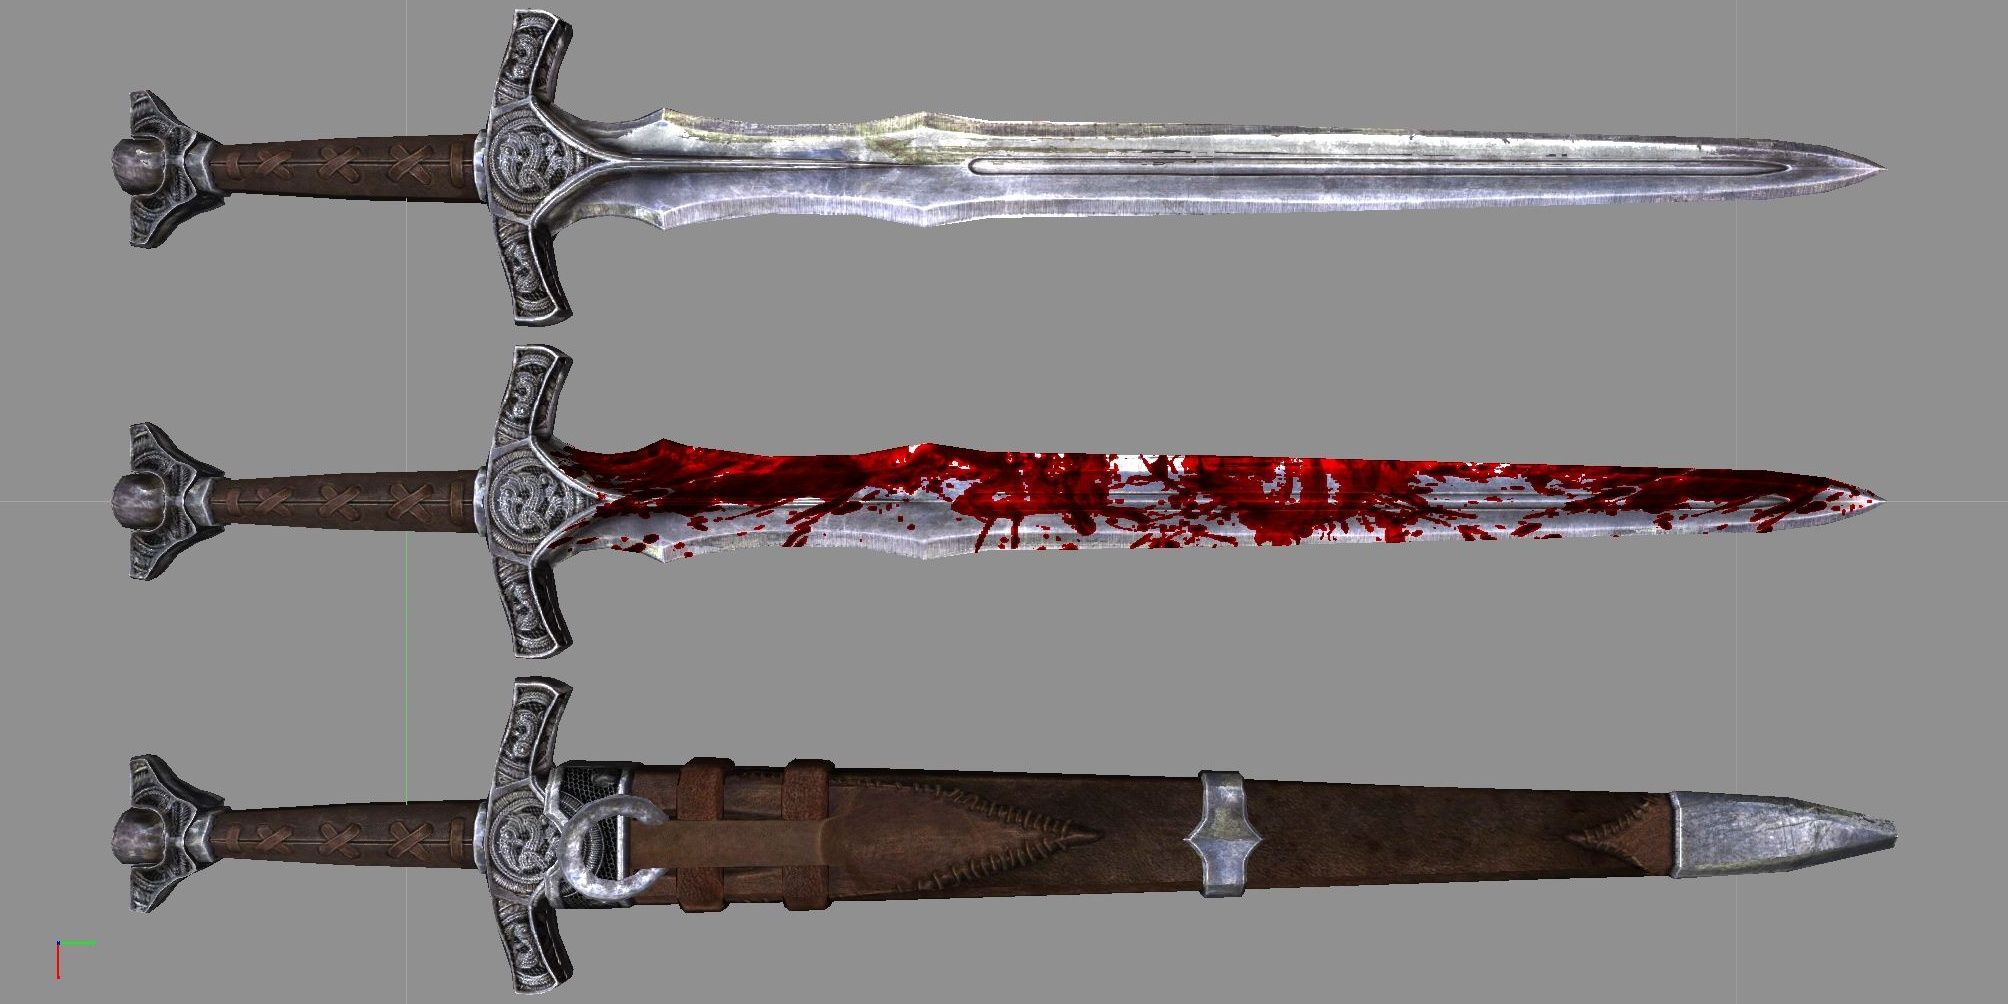 LeanWolf's Better-Shaped Weapons mod for Skyrim